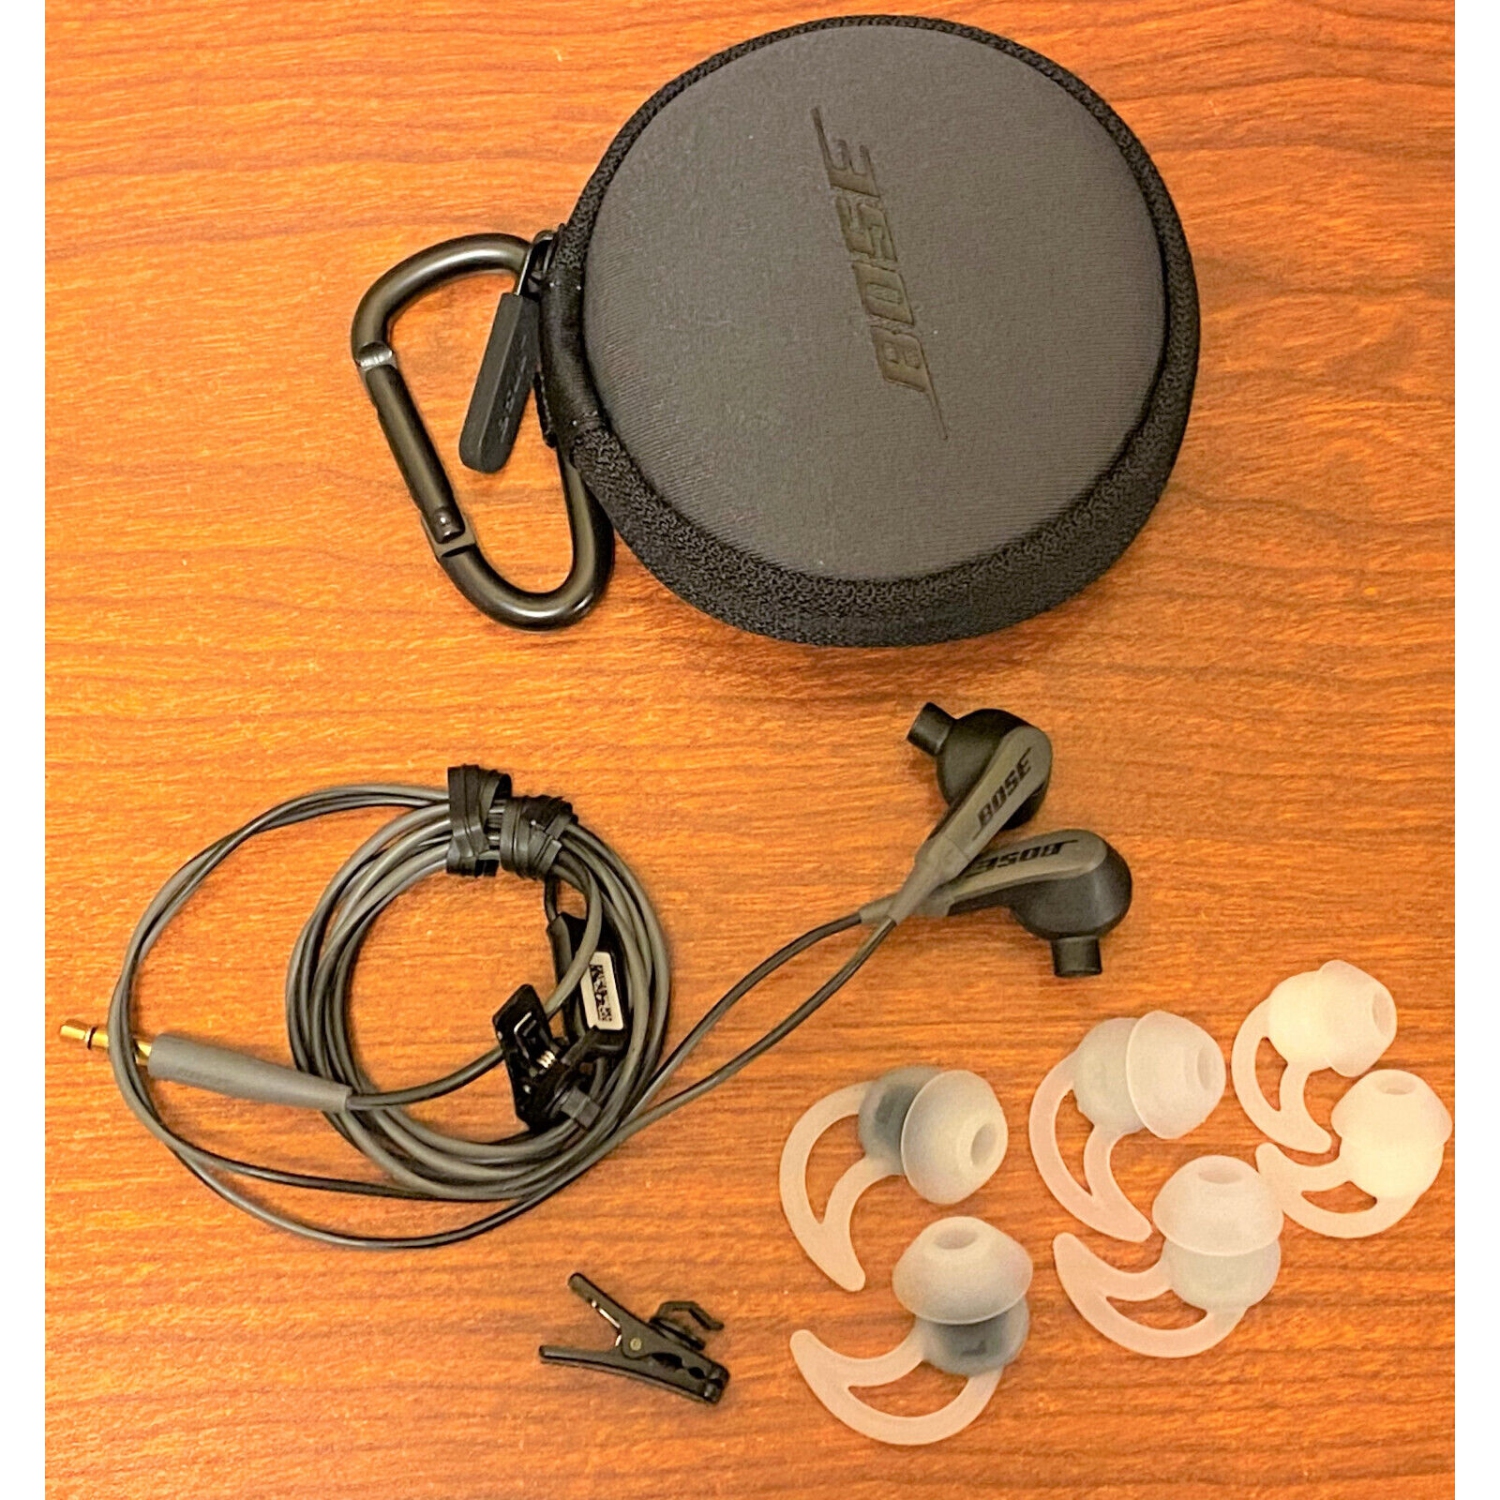 Refurbished, Good: Bose SoundSport In-Ear Headphones - Samsung and Android Devices, Charcoal